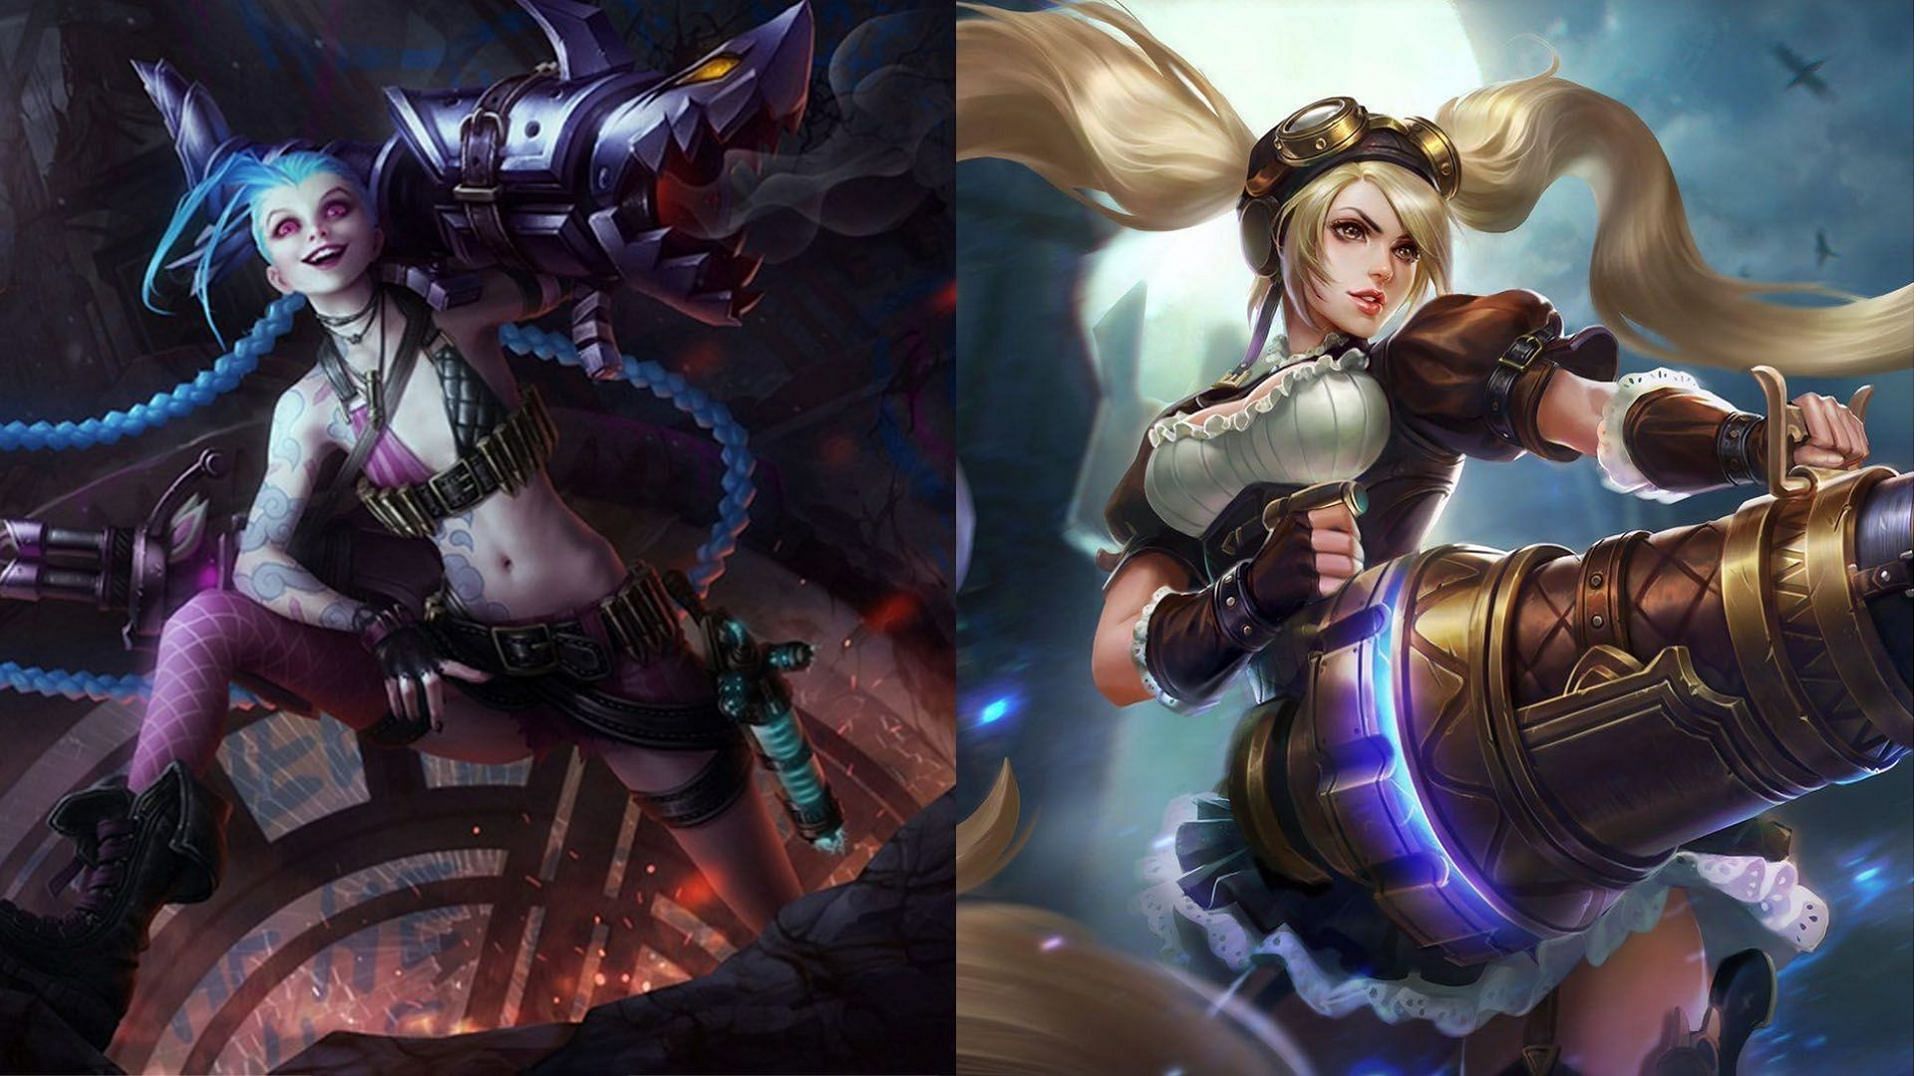 Wild Rift vs Mobile Legends: Which is the better mobile MOBA?